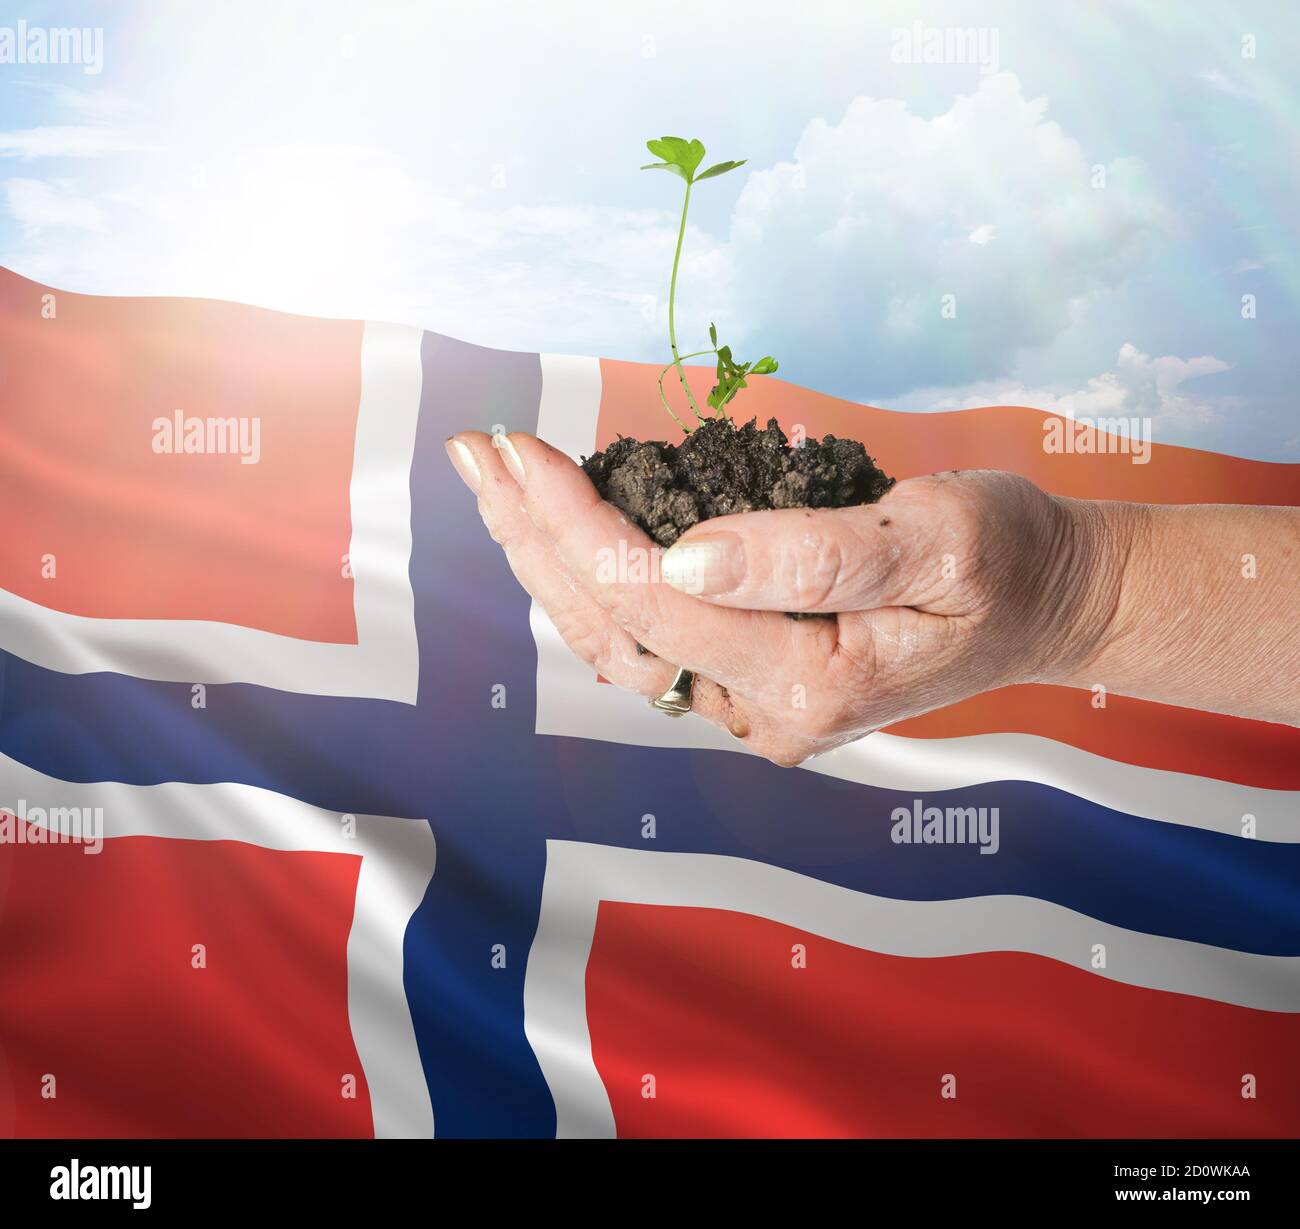 Norway growth and new beginning. Green renewable energy and ecology concept. Hand holding young plant. Stock Photo